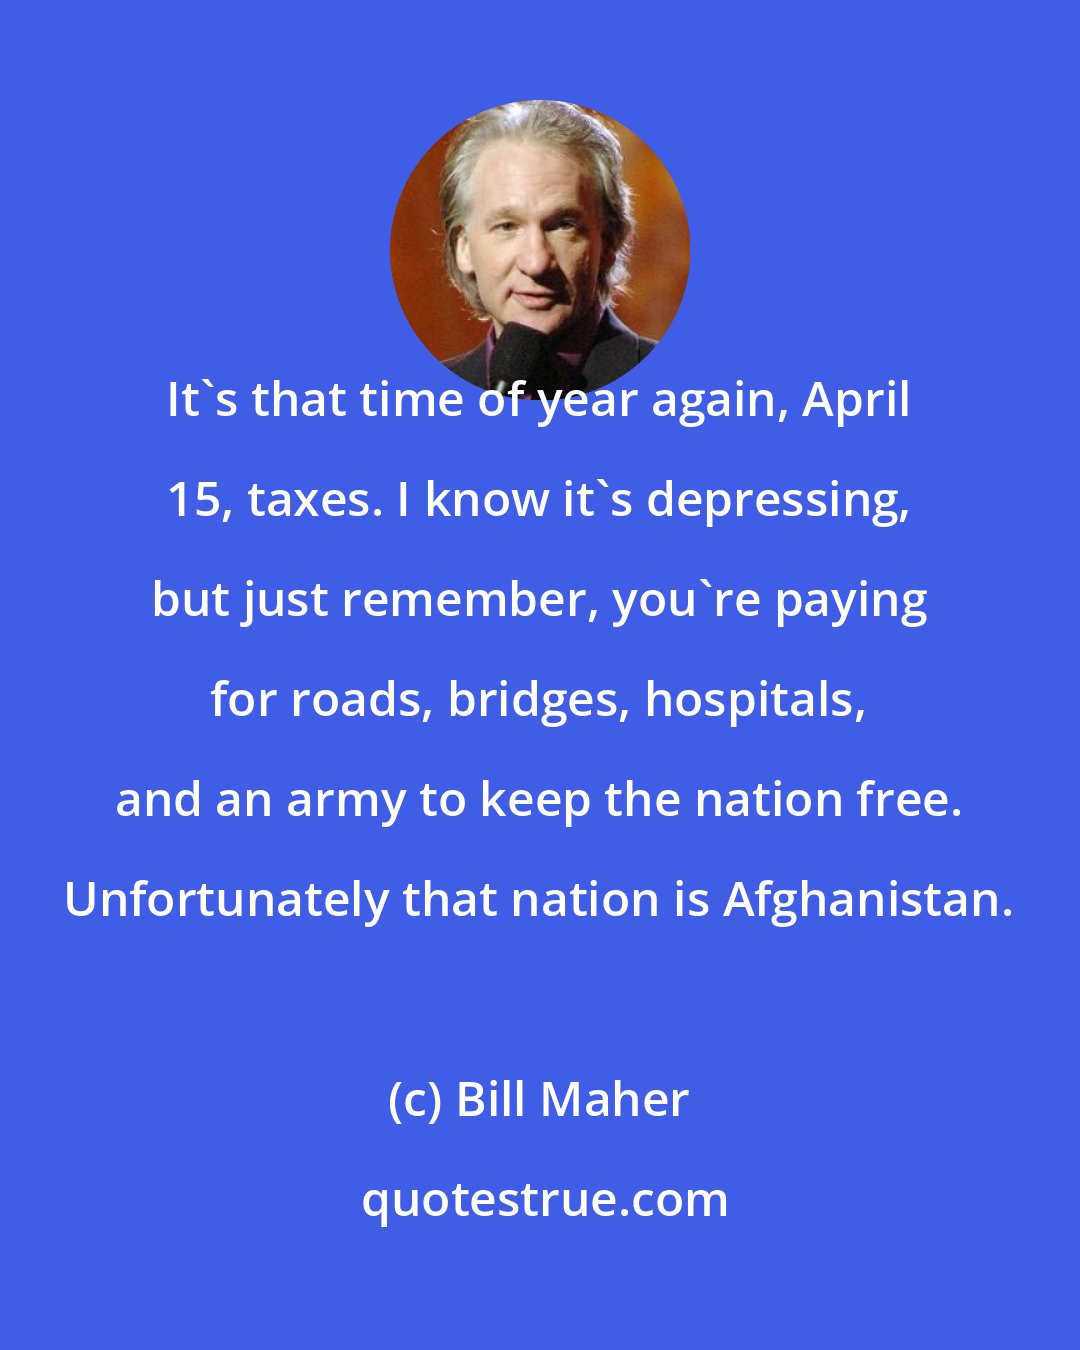 Bill Maher: It's that time of year again, April 15, taxes. I know it's depressing, but just remember, you're paying for roads, bridges, hospitals, and an army to keep the nation free. Unfortunately that nation is Afghanistan.